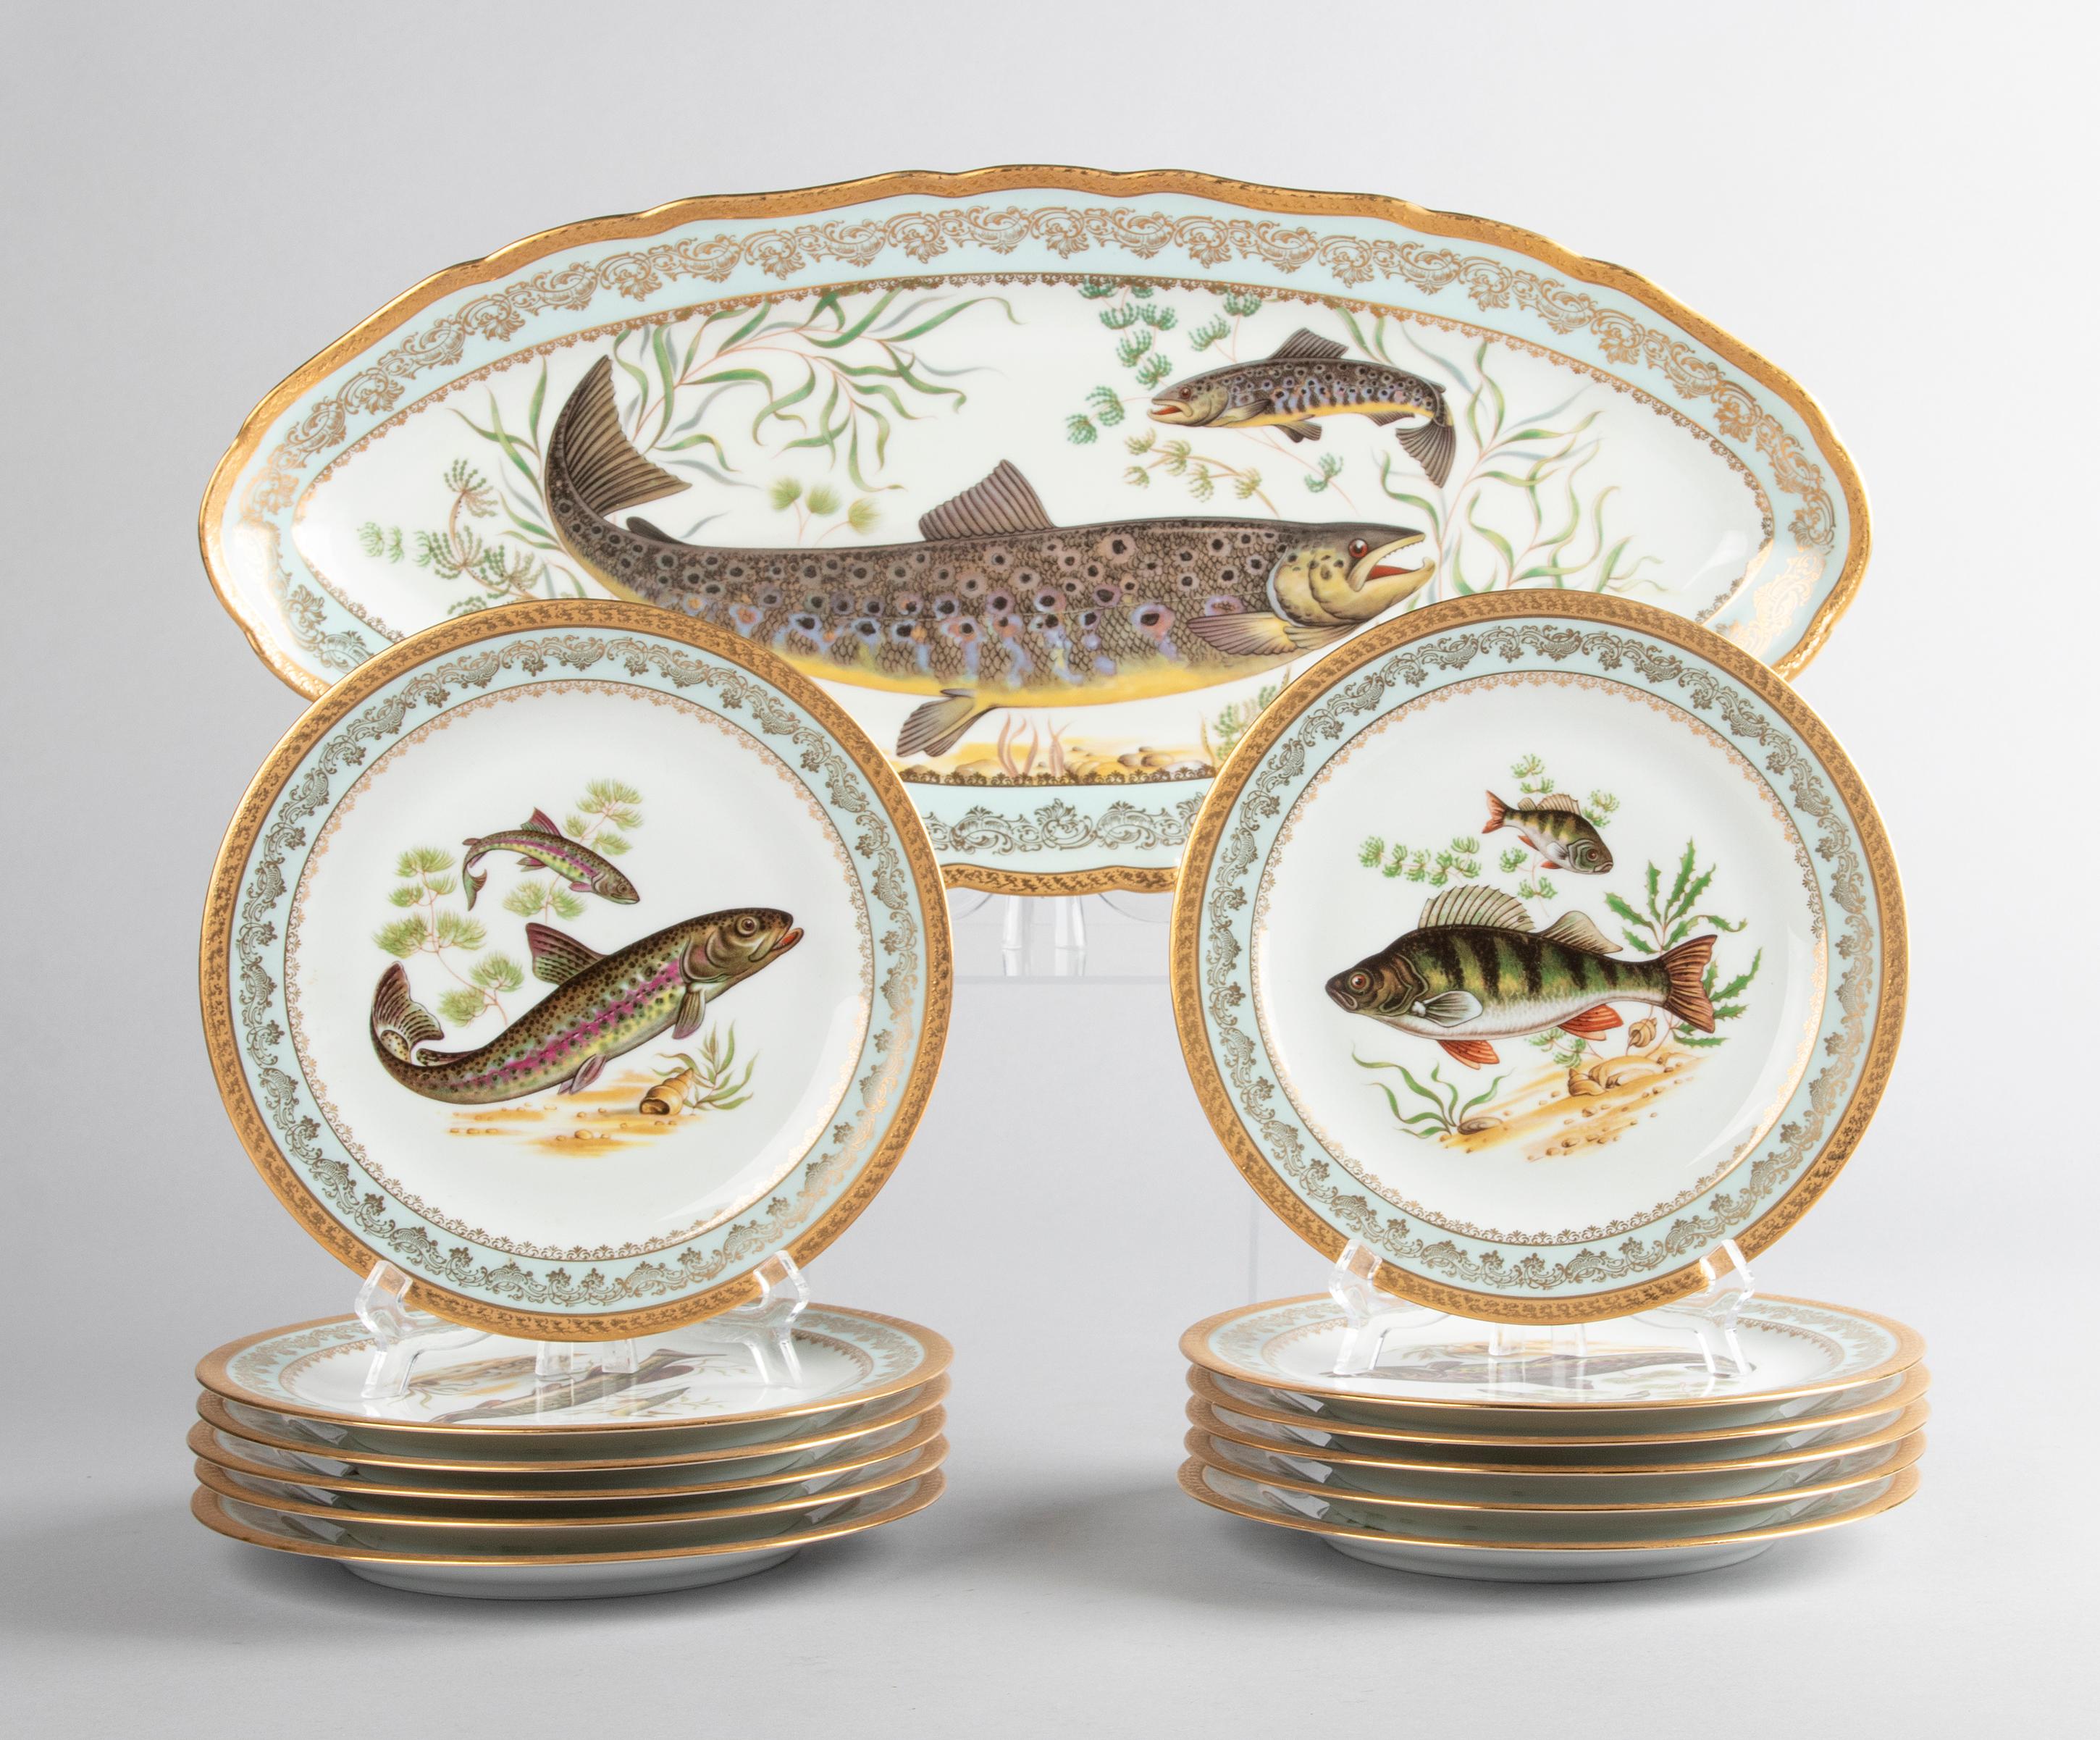 Beautiful set of porcelain fish service for 12 people by the French brand Limoges. The set consists of twelve plates, all decorated with different images of fish, and a large oval serving dish. The service has beautiful mint green edges with gold